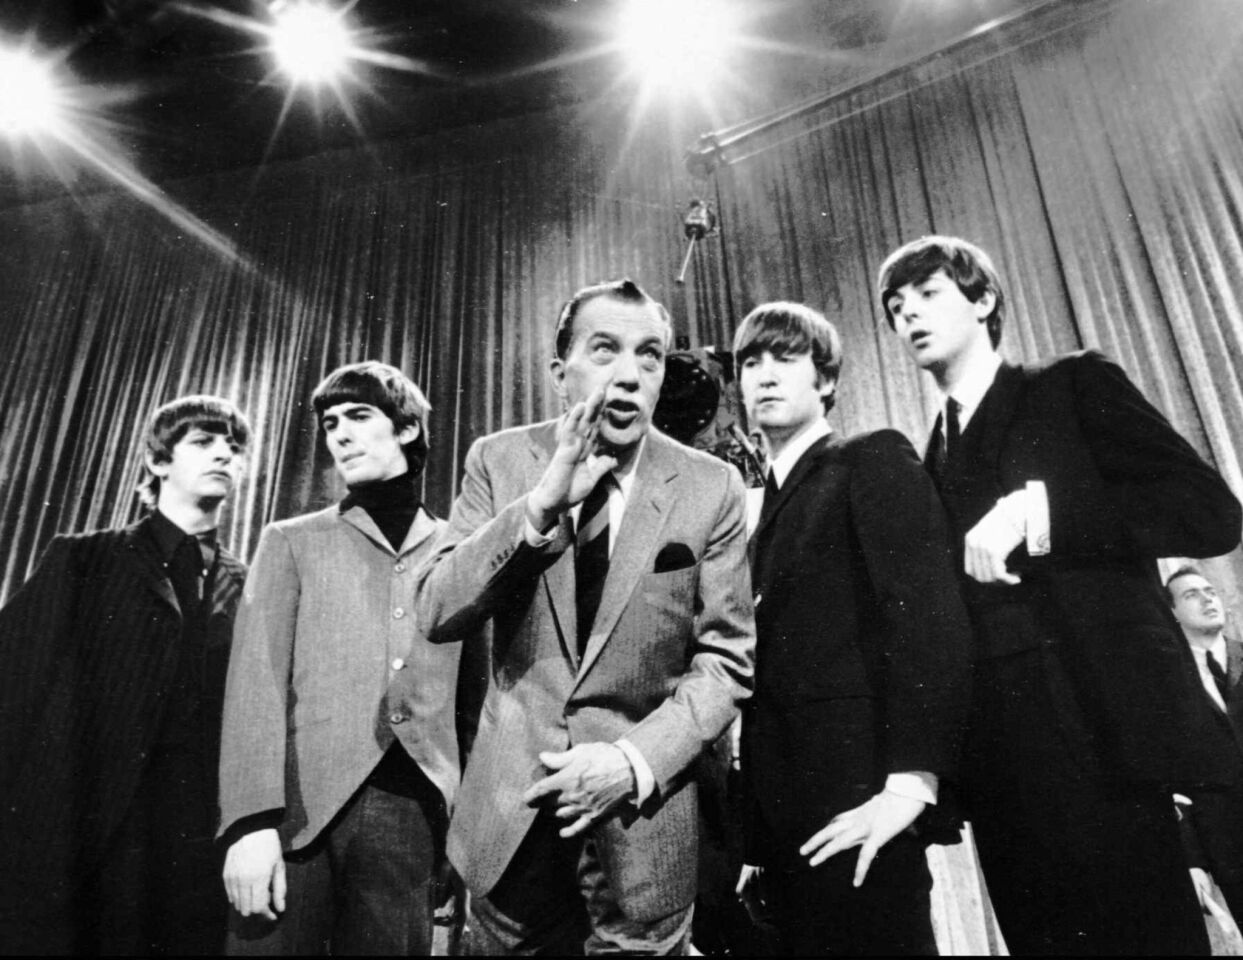 Longtime CBS mainstay Ed Sullivan rehearses his Sunday night television variety show with the Beatles in their first appearance in the United States, Feb. 9, 1964.